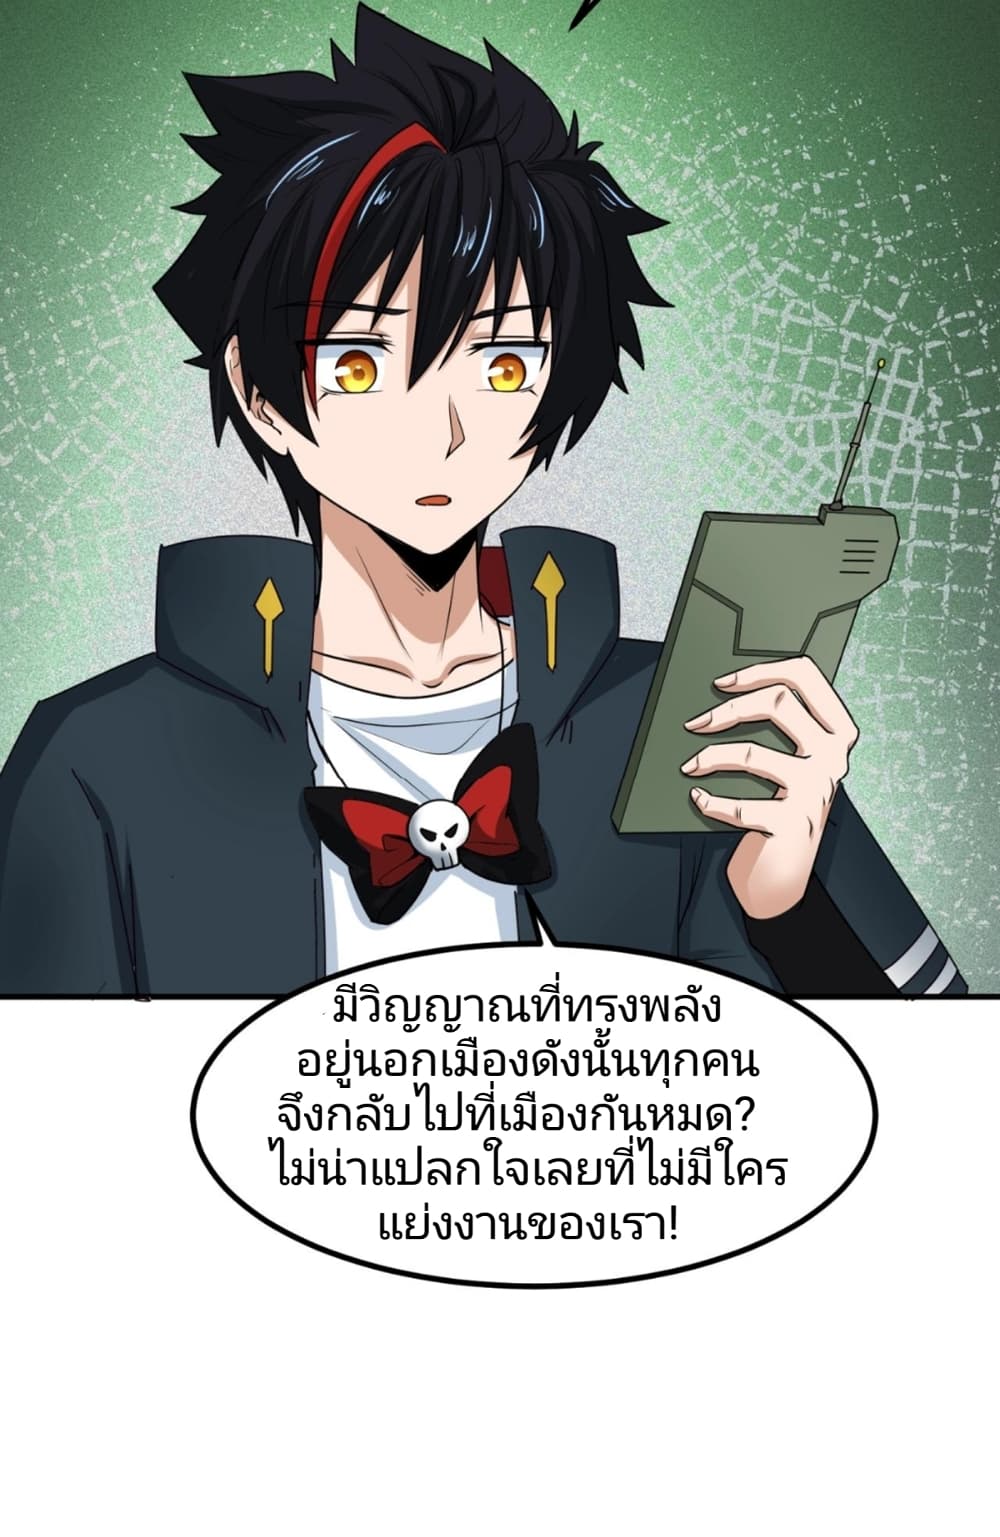 The Age of Ghost Spirits à¸à¸­à¸à¸à¸µà¹ 9 (13)